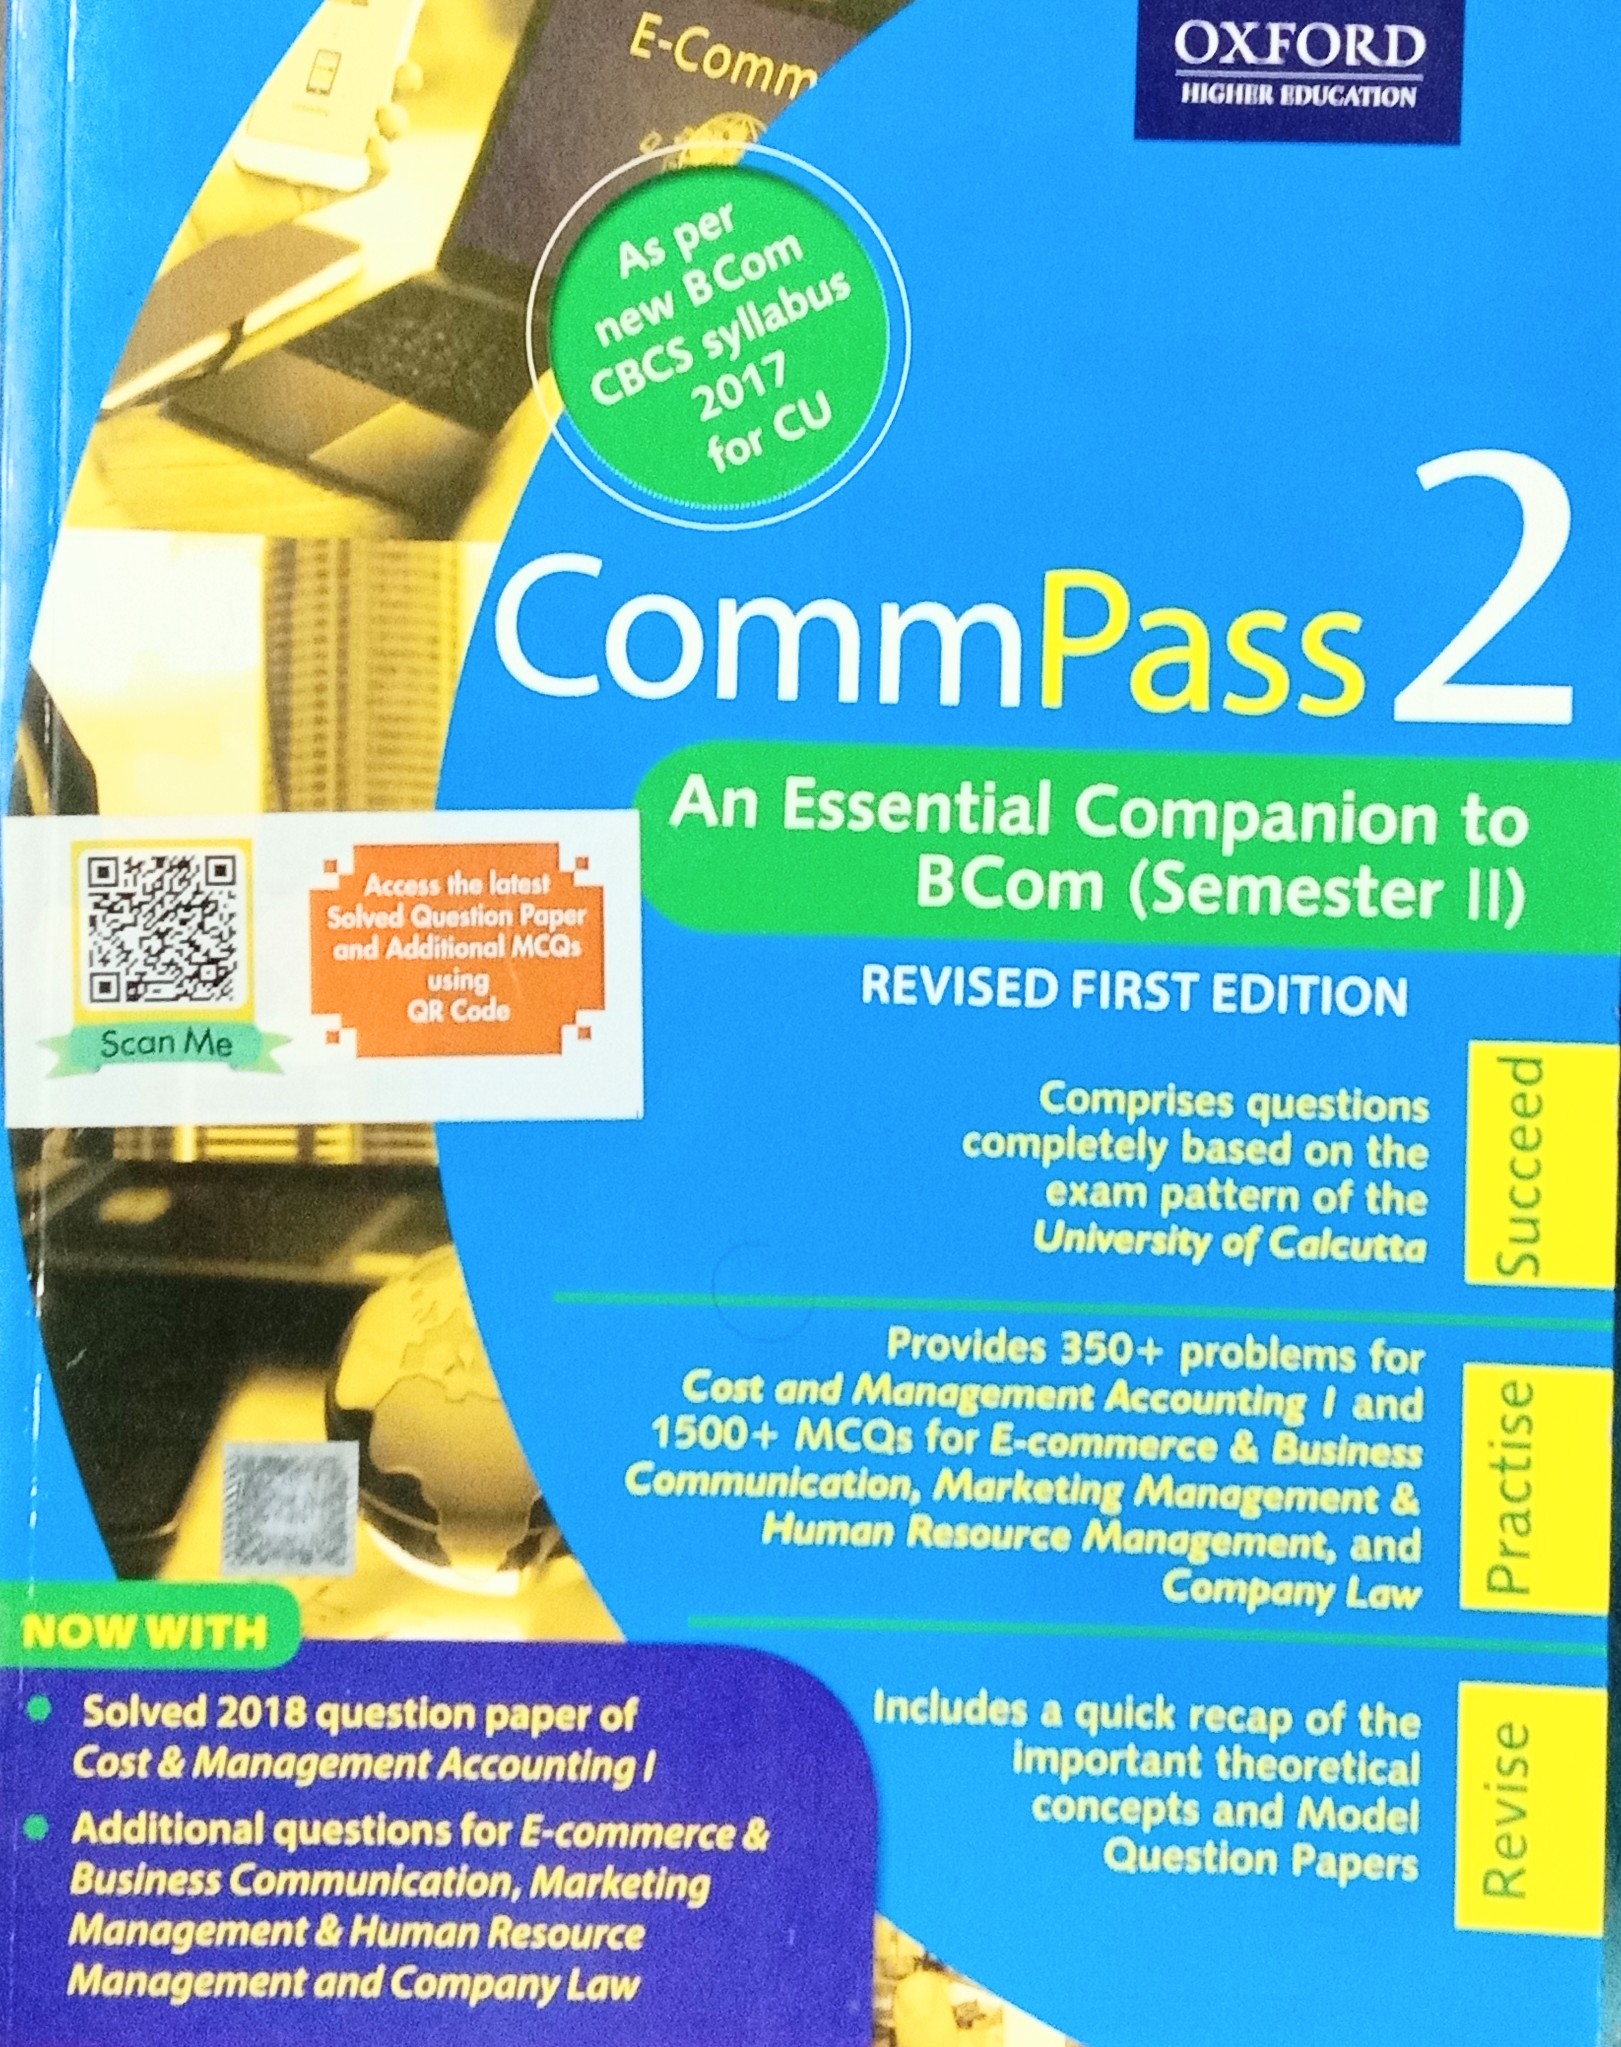 CommPass 2 An Essential Companion to B Com Semester II By Oxford